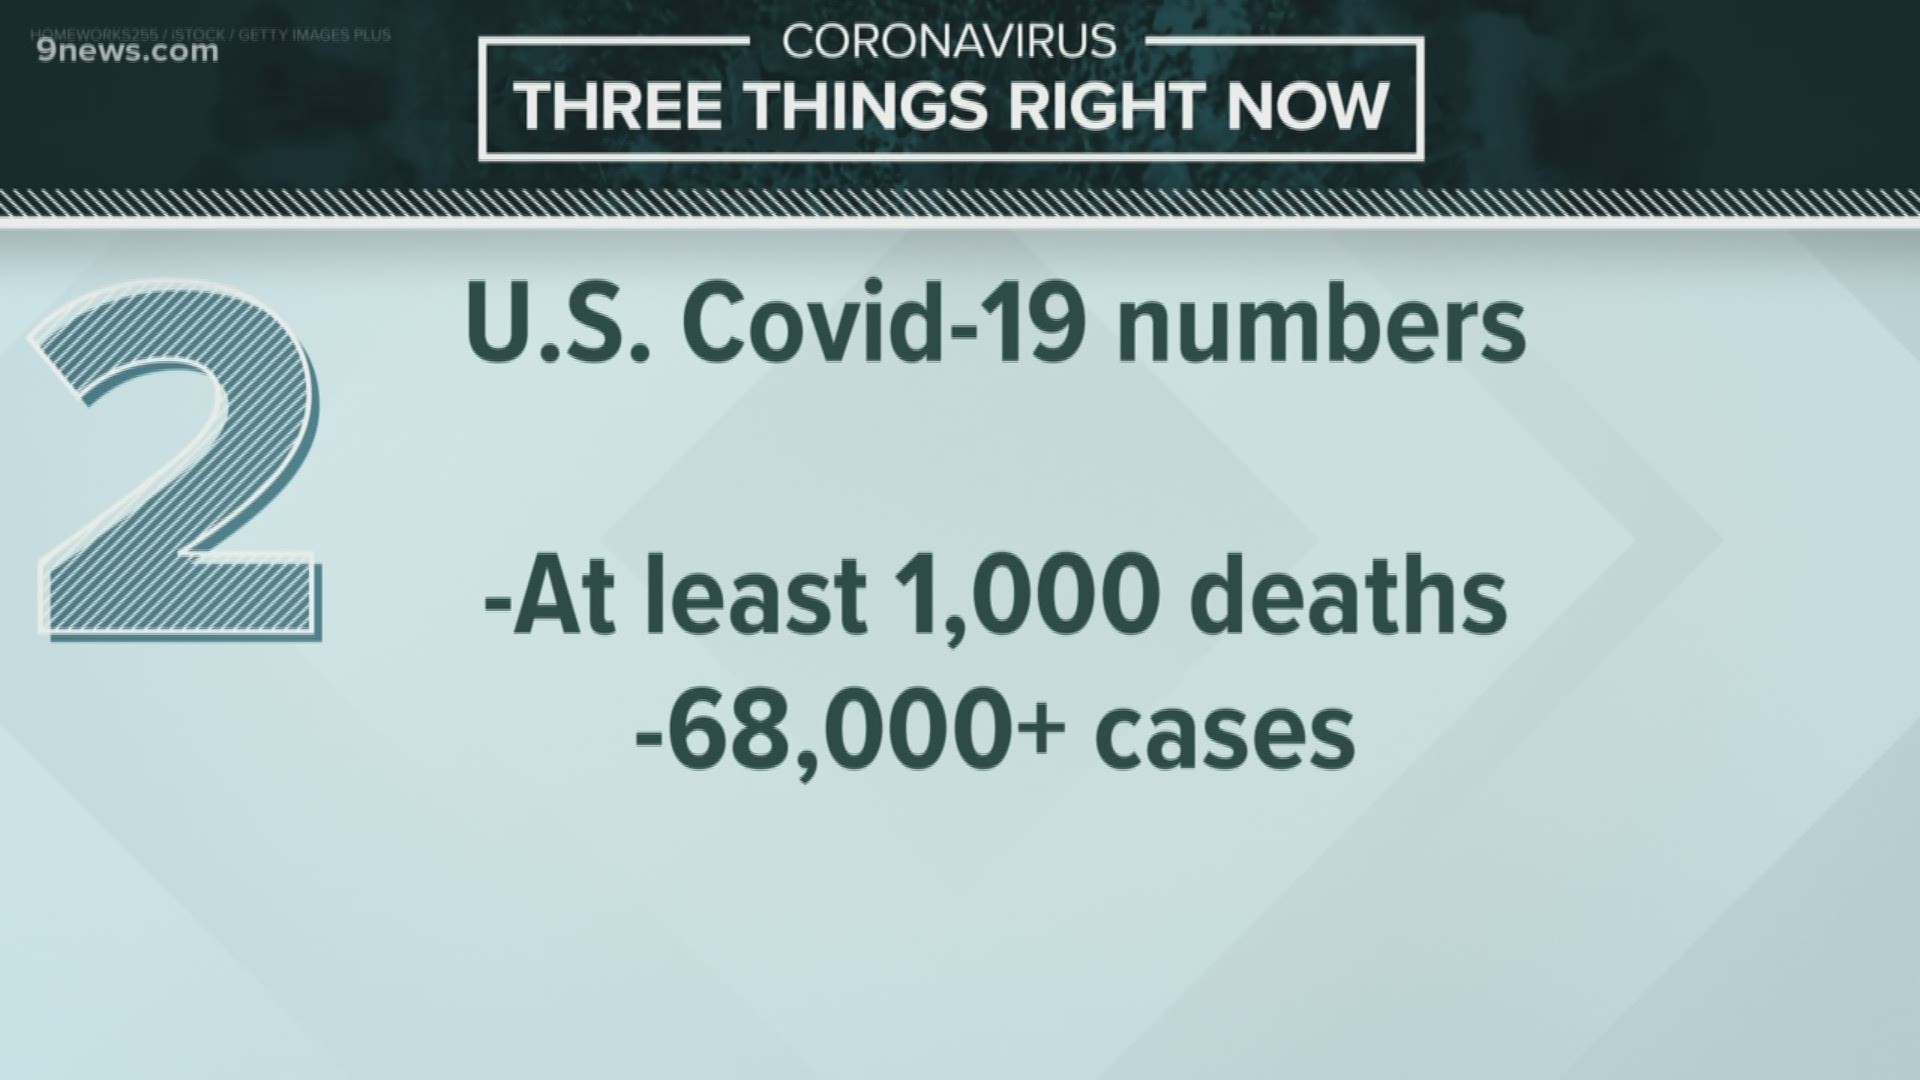 Here the top headlines regarding COVID-19 in Colorado, including details on a statewide stay-at-home order.